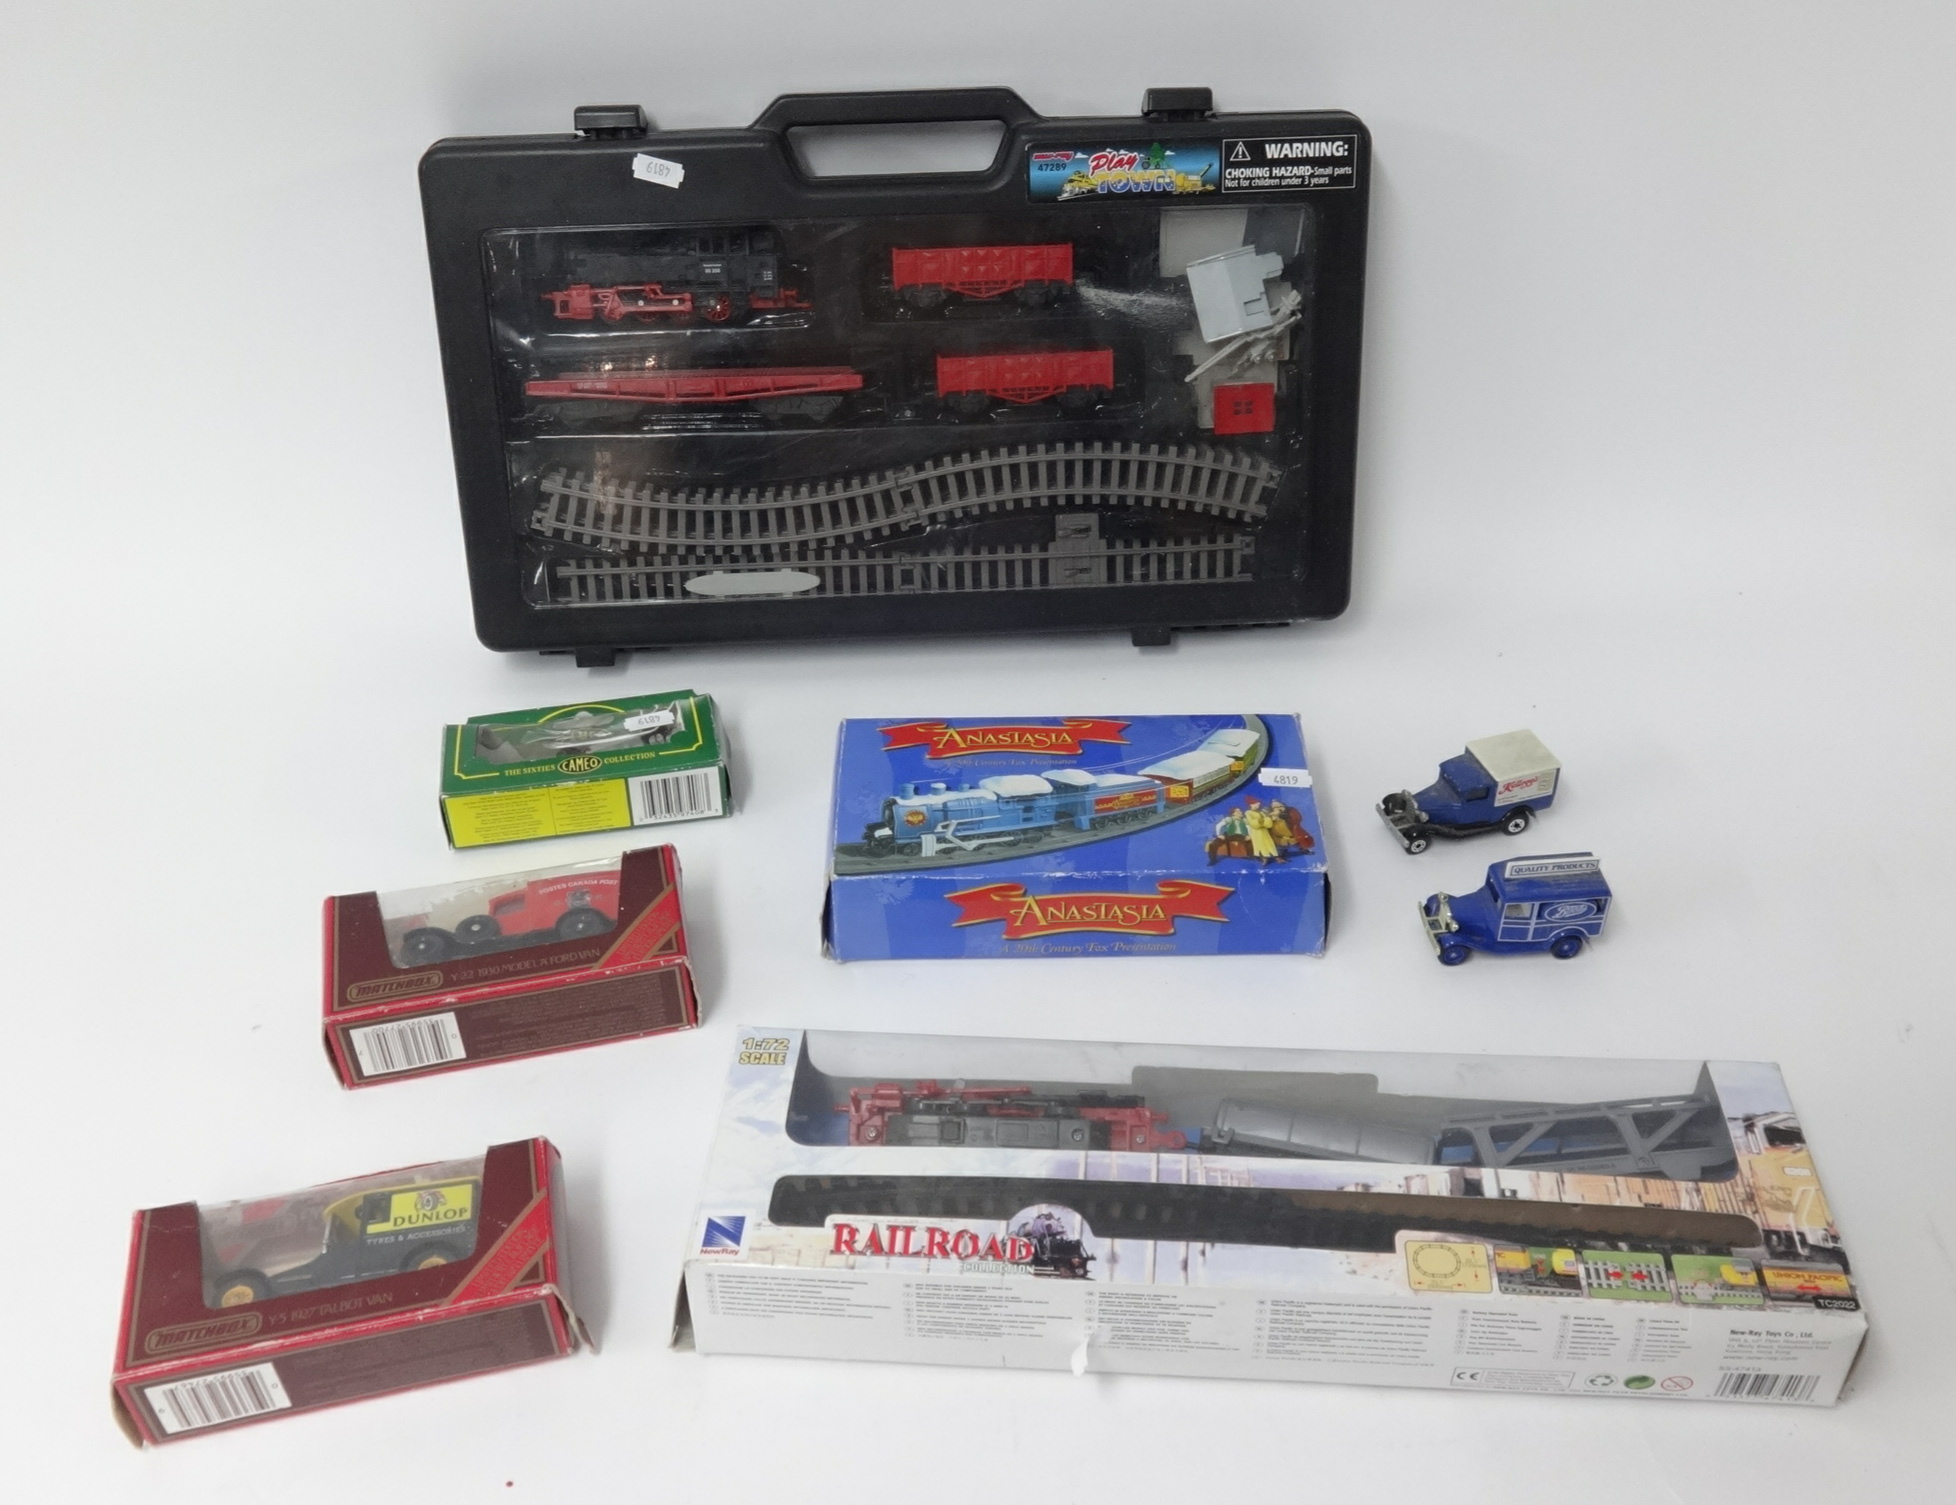 Three battery train sets including rail road and also some Models of Yesteryear.